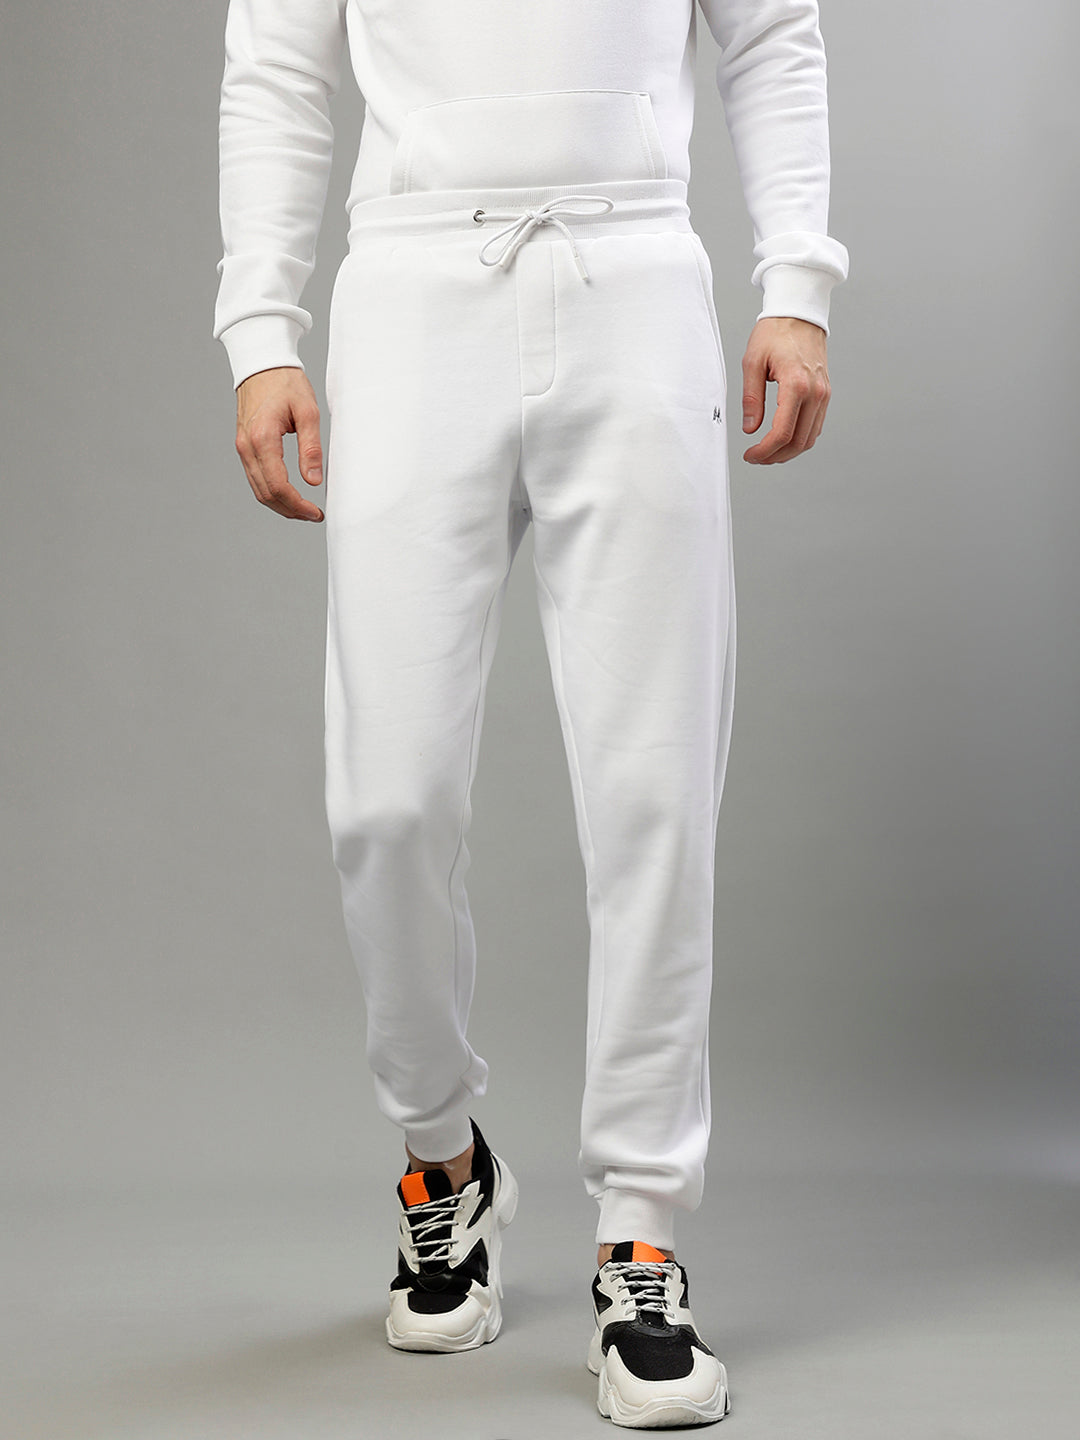 Buy T10 Sports White Full Polyester Track Pant for Men at Amazon.in